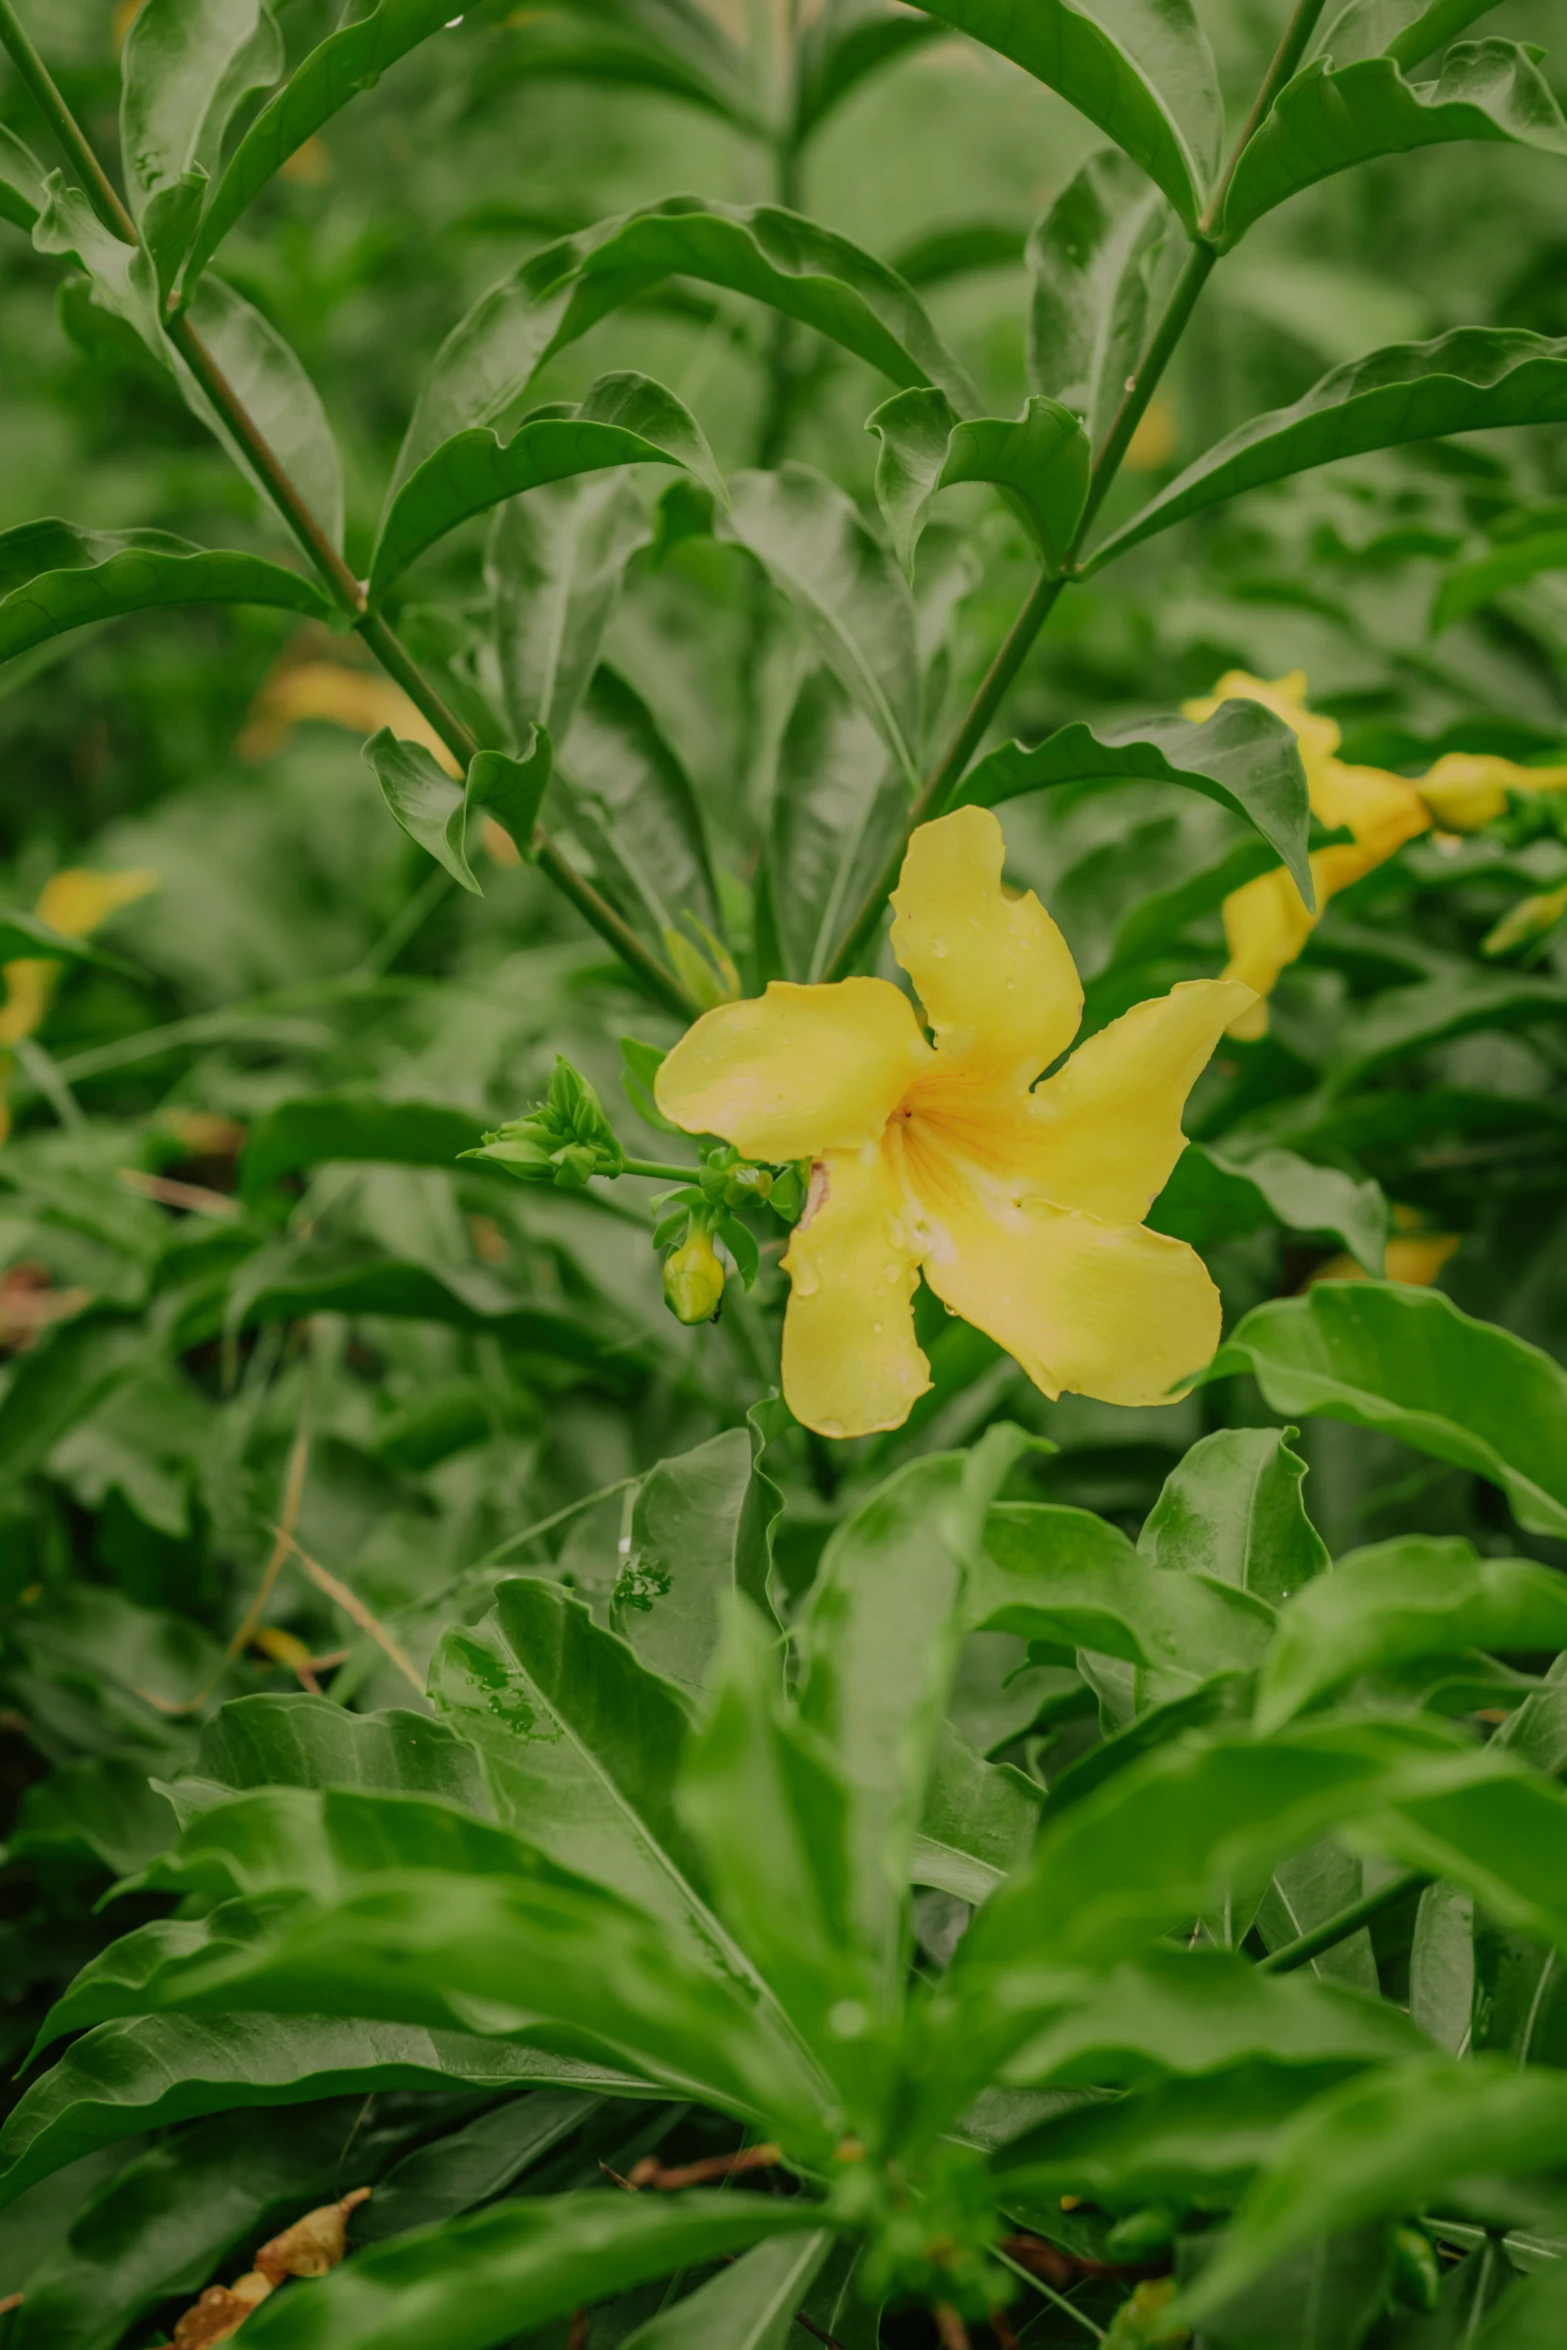 yellow flowers bloom on the large green plant